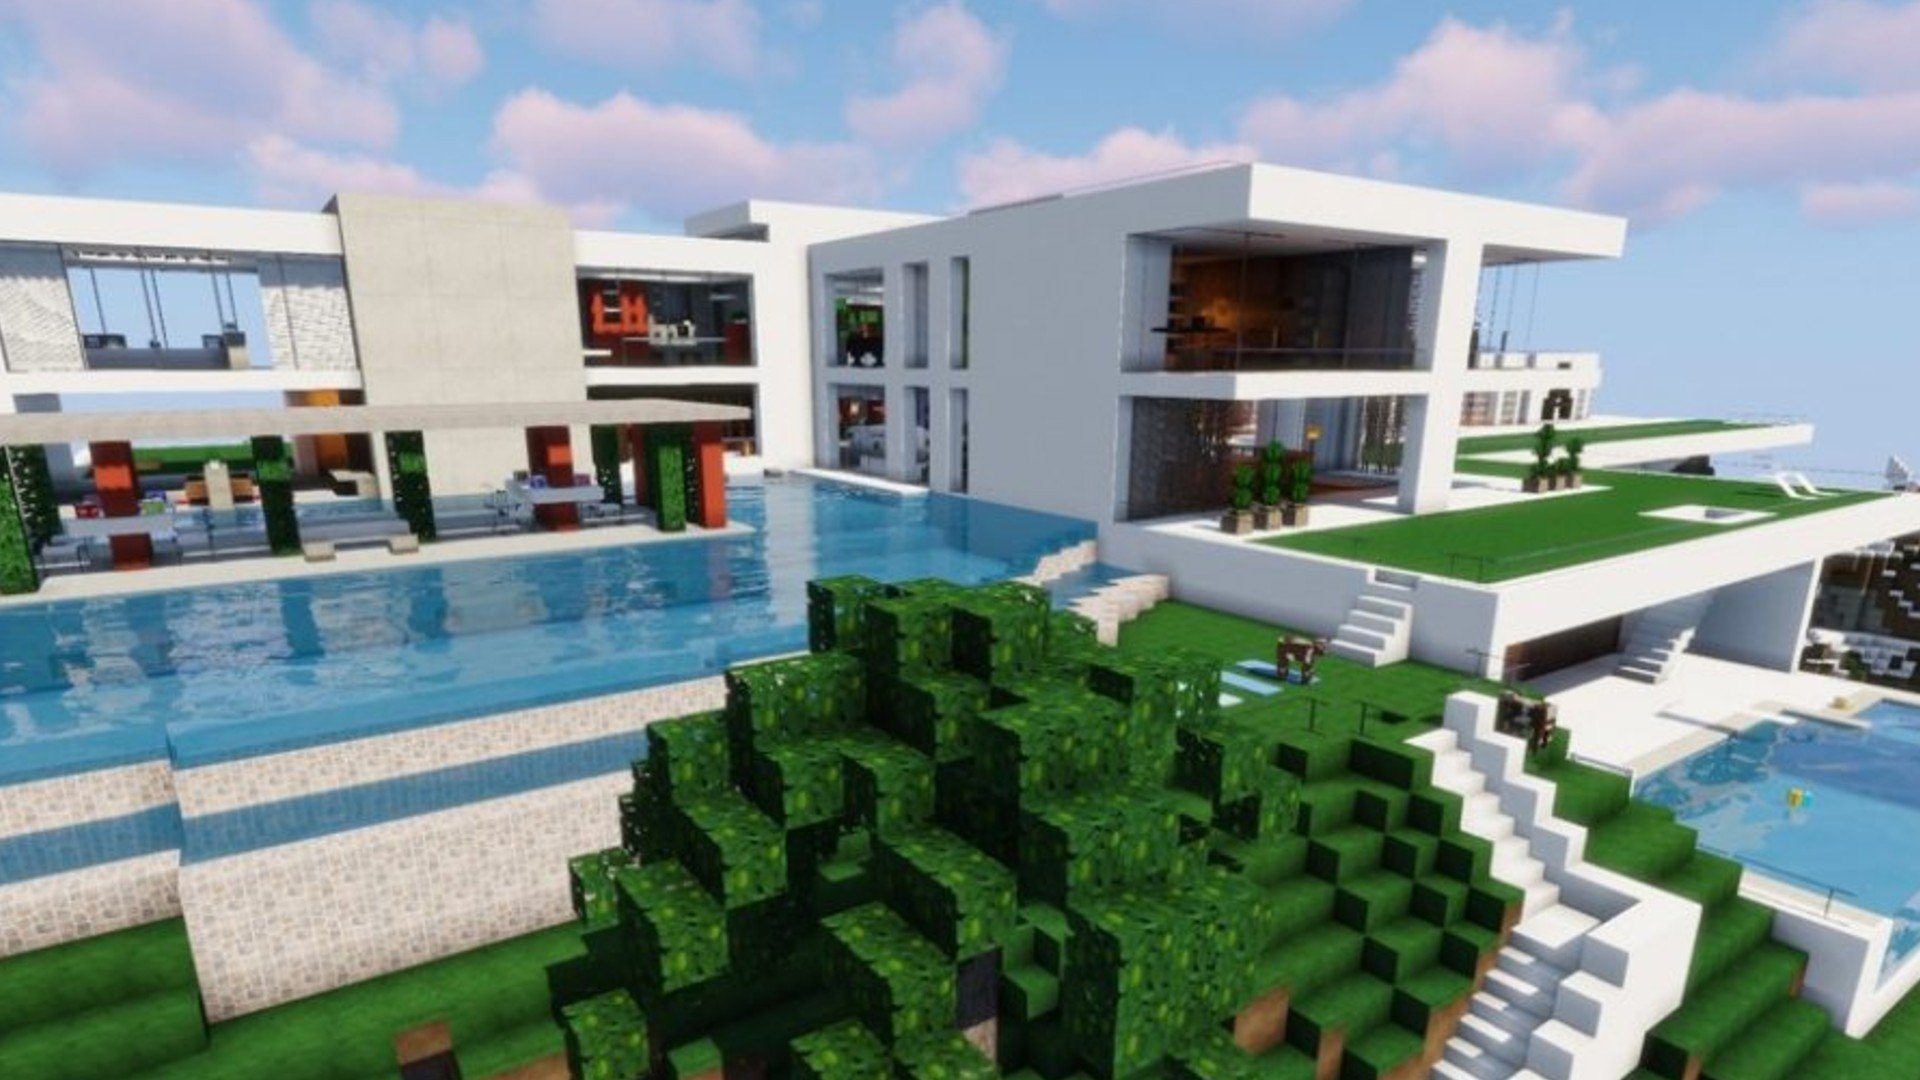 Cool Minecraft houses: ideas for your next build